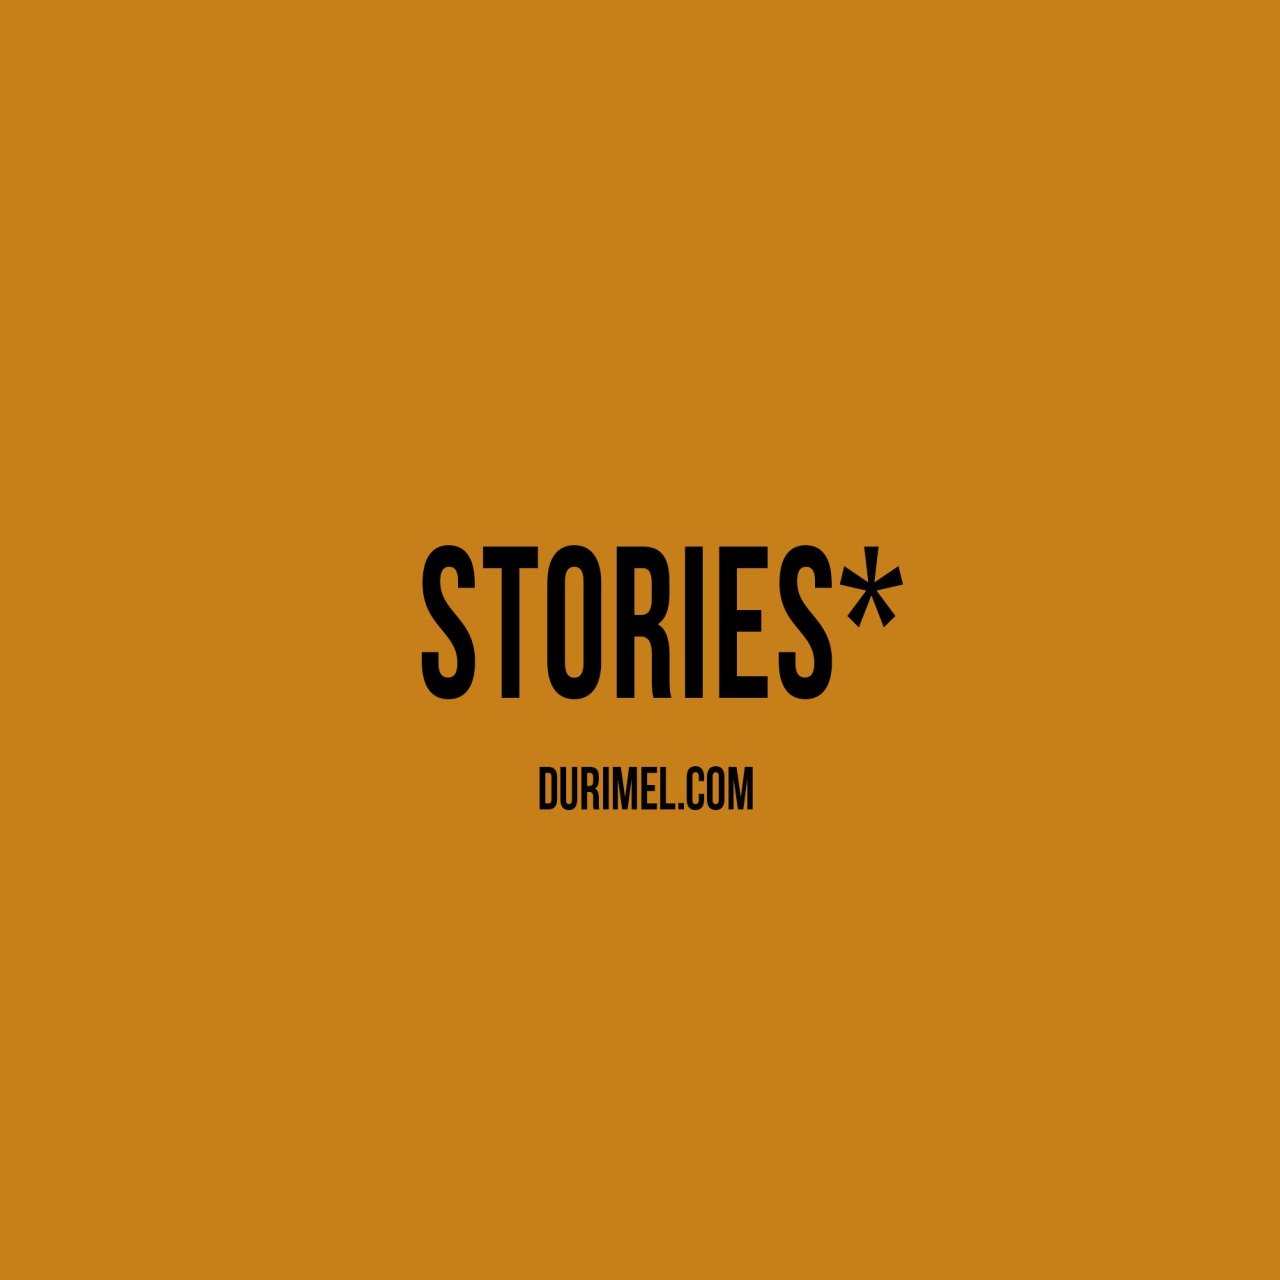 We&#8217;re excited to introduce a new segment today. So long story short - We&#8217;re getting a little tired of only shooting ourselves for our site so we&#8217;re bringing new photo stories and characters to the blog. Hope you guys enjoy!  - Jalan and Jibril Durimel